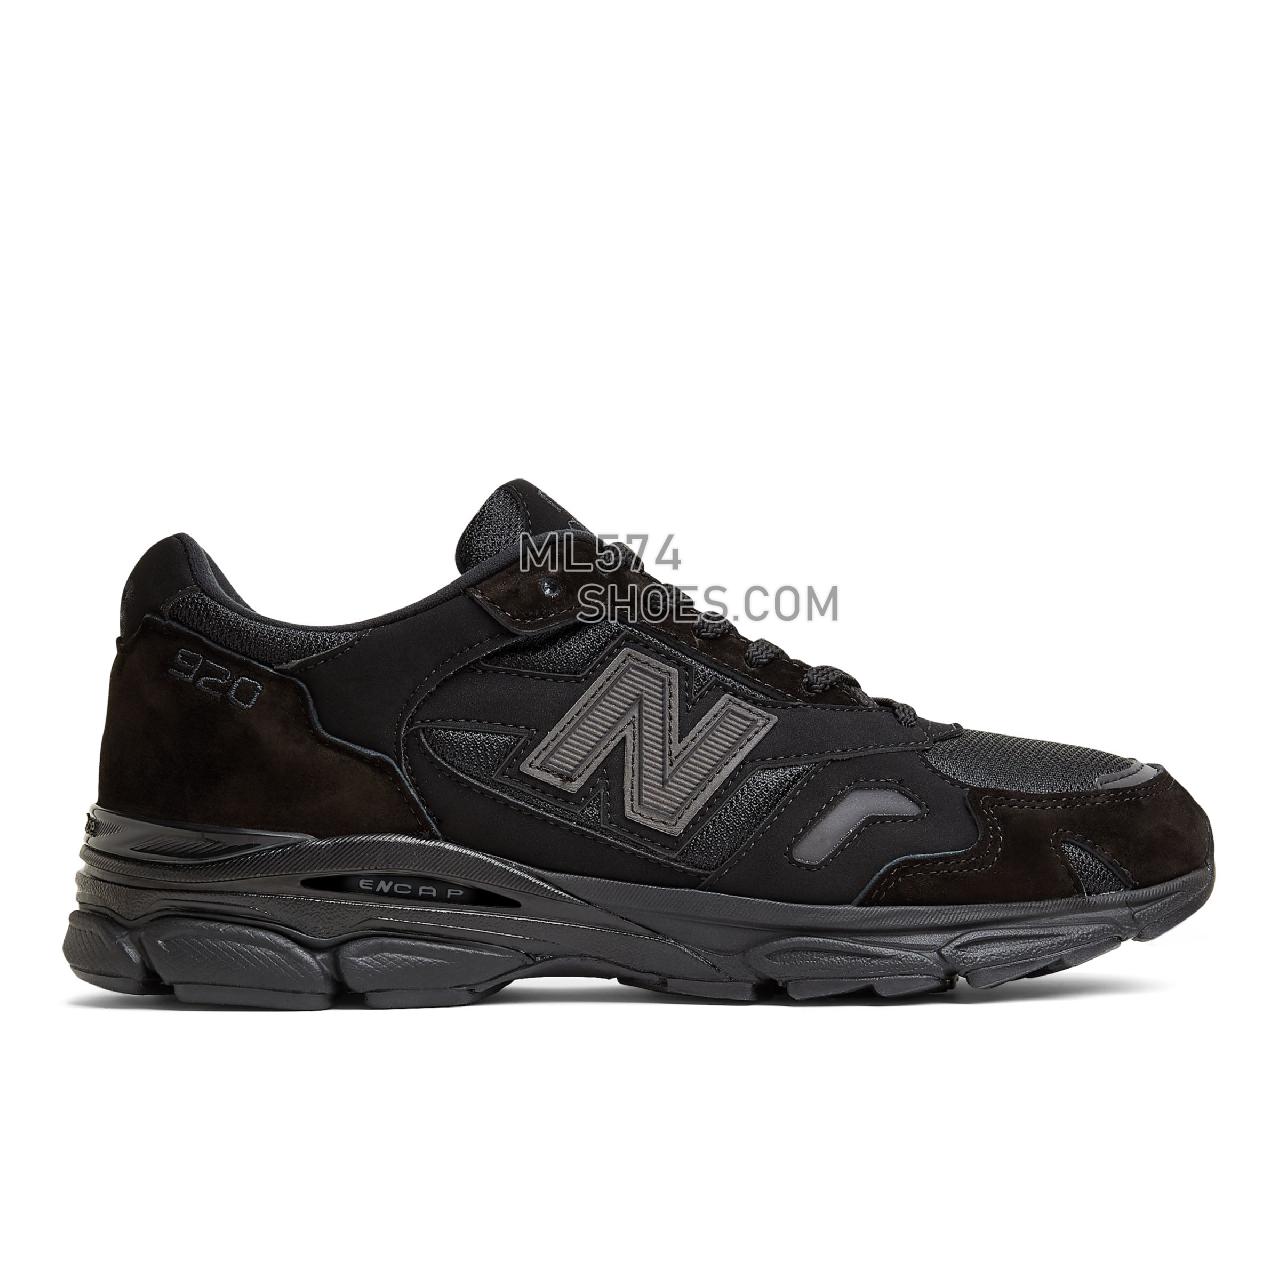 New Balance Made in UK 920 - Men's Made in USA And UK Sneakers - Black with Grey and White - M920BLK